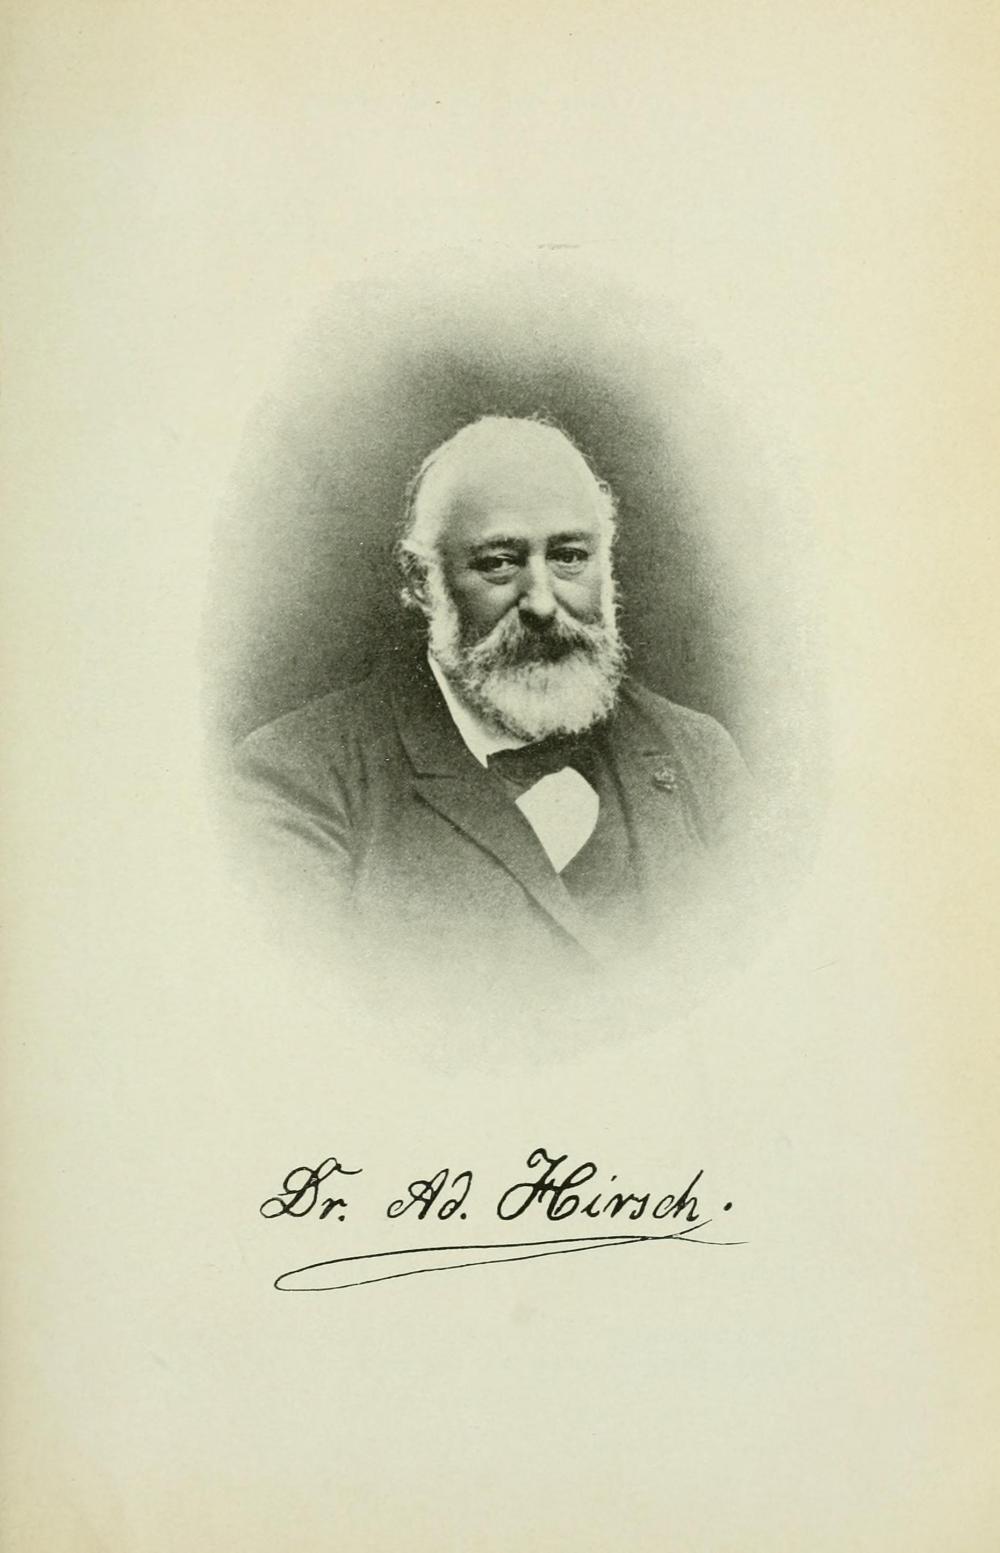 Adolphe Hirsch (1830--1901), director from 1858 to